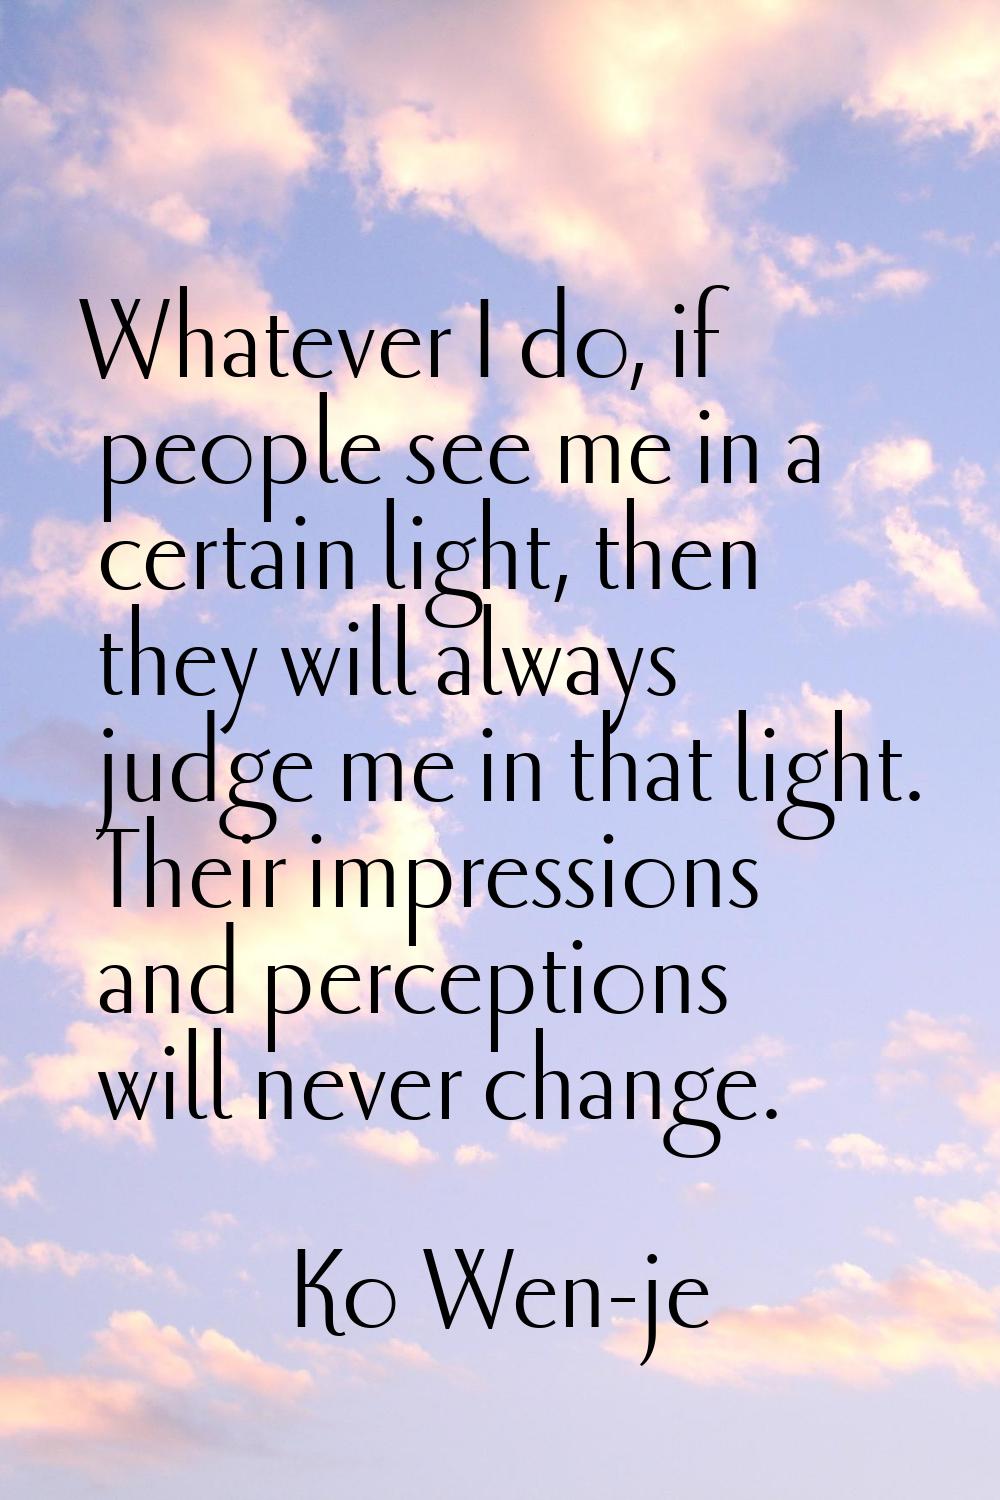 Whatever I do, if people see me in a certain light, then they will always judge me in that light. T